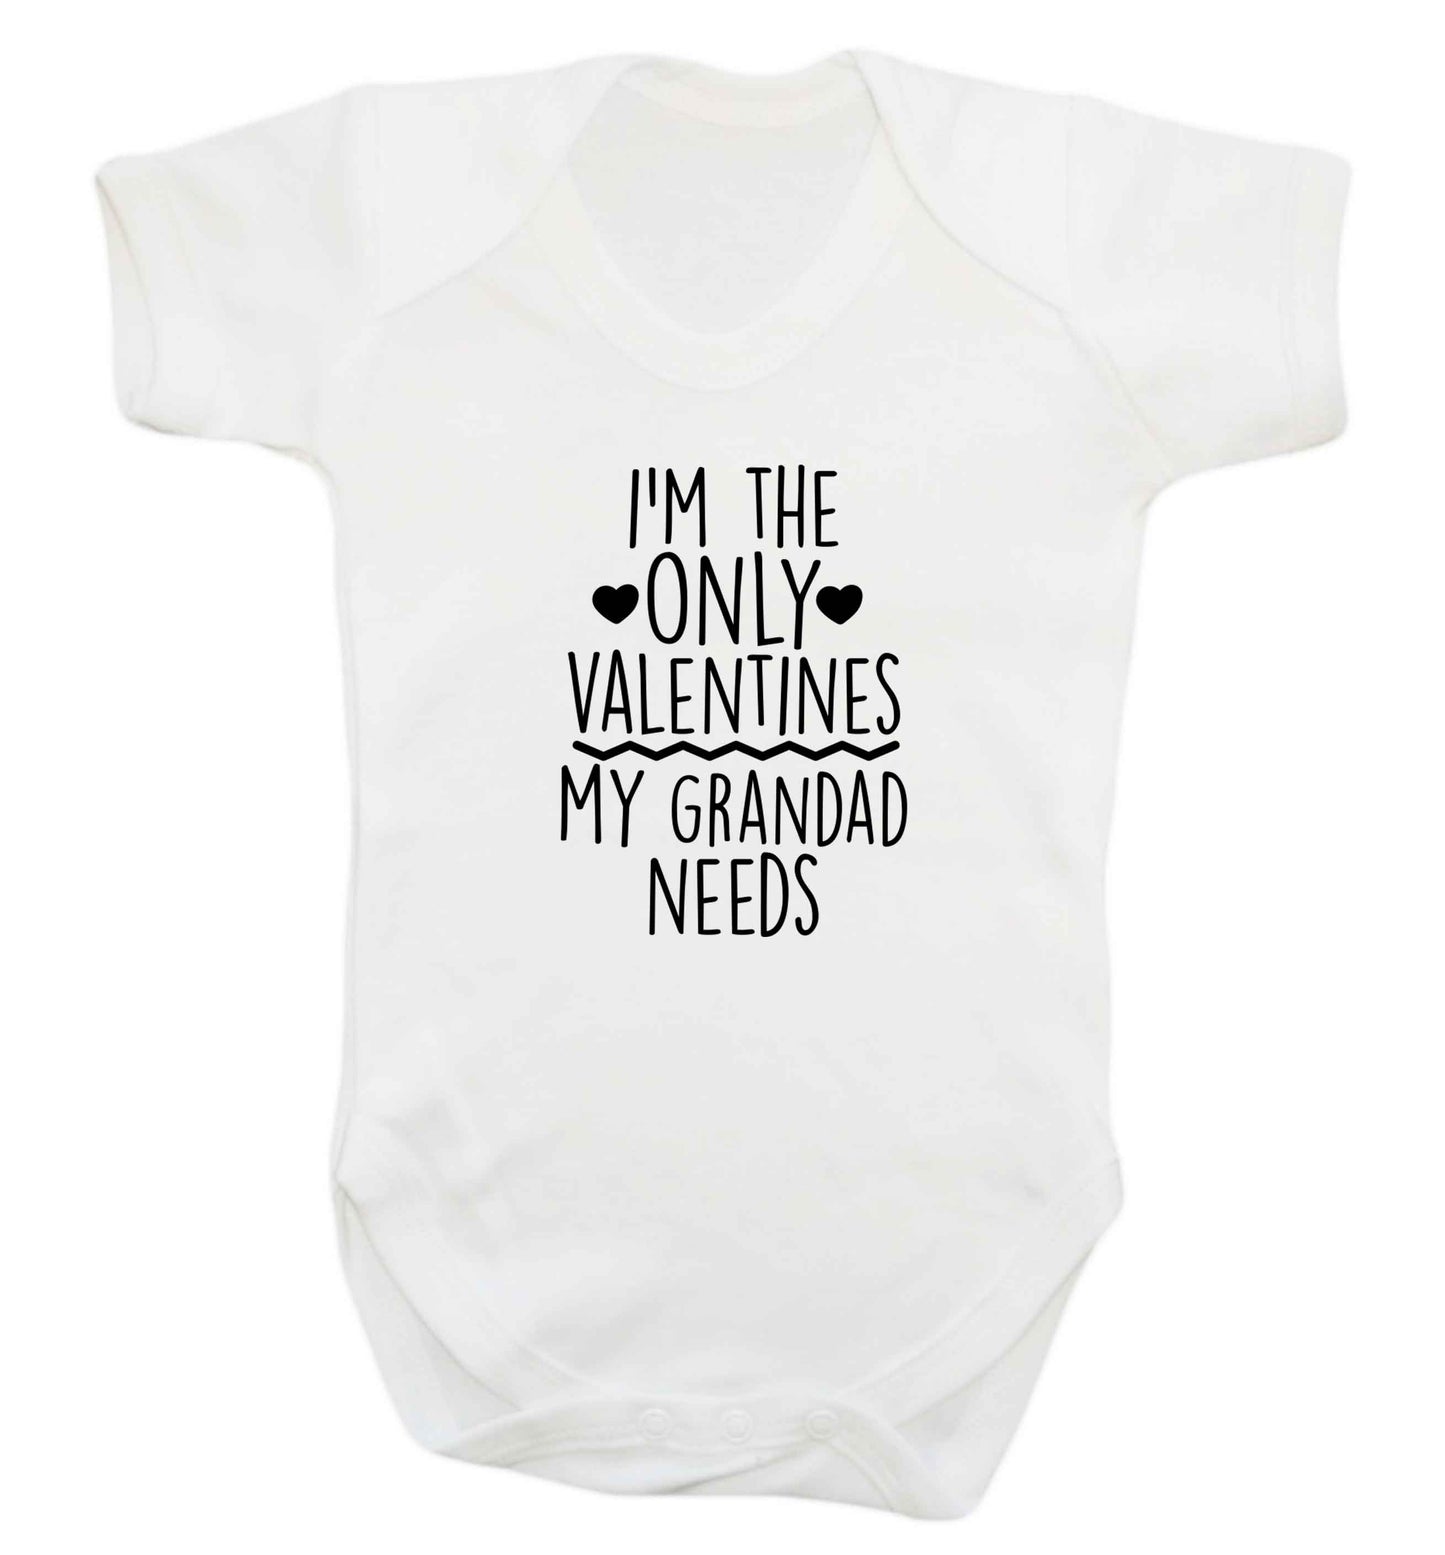 I'm the only valentines my grandad needs baby vest white 18-24 months